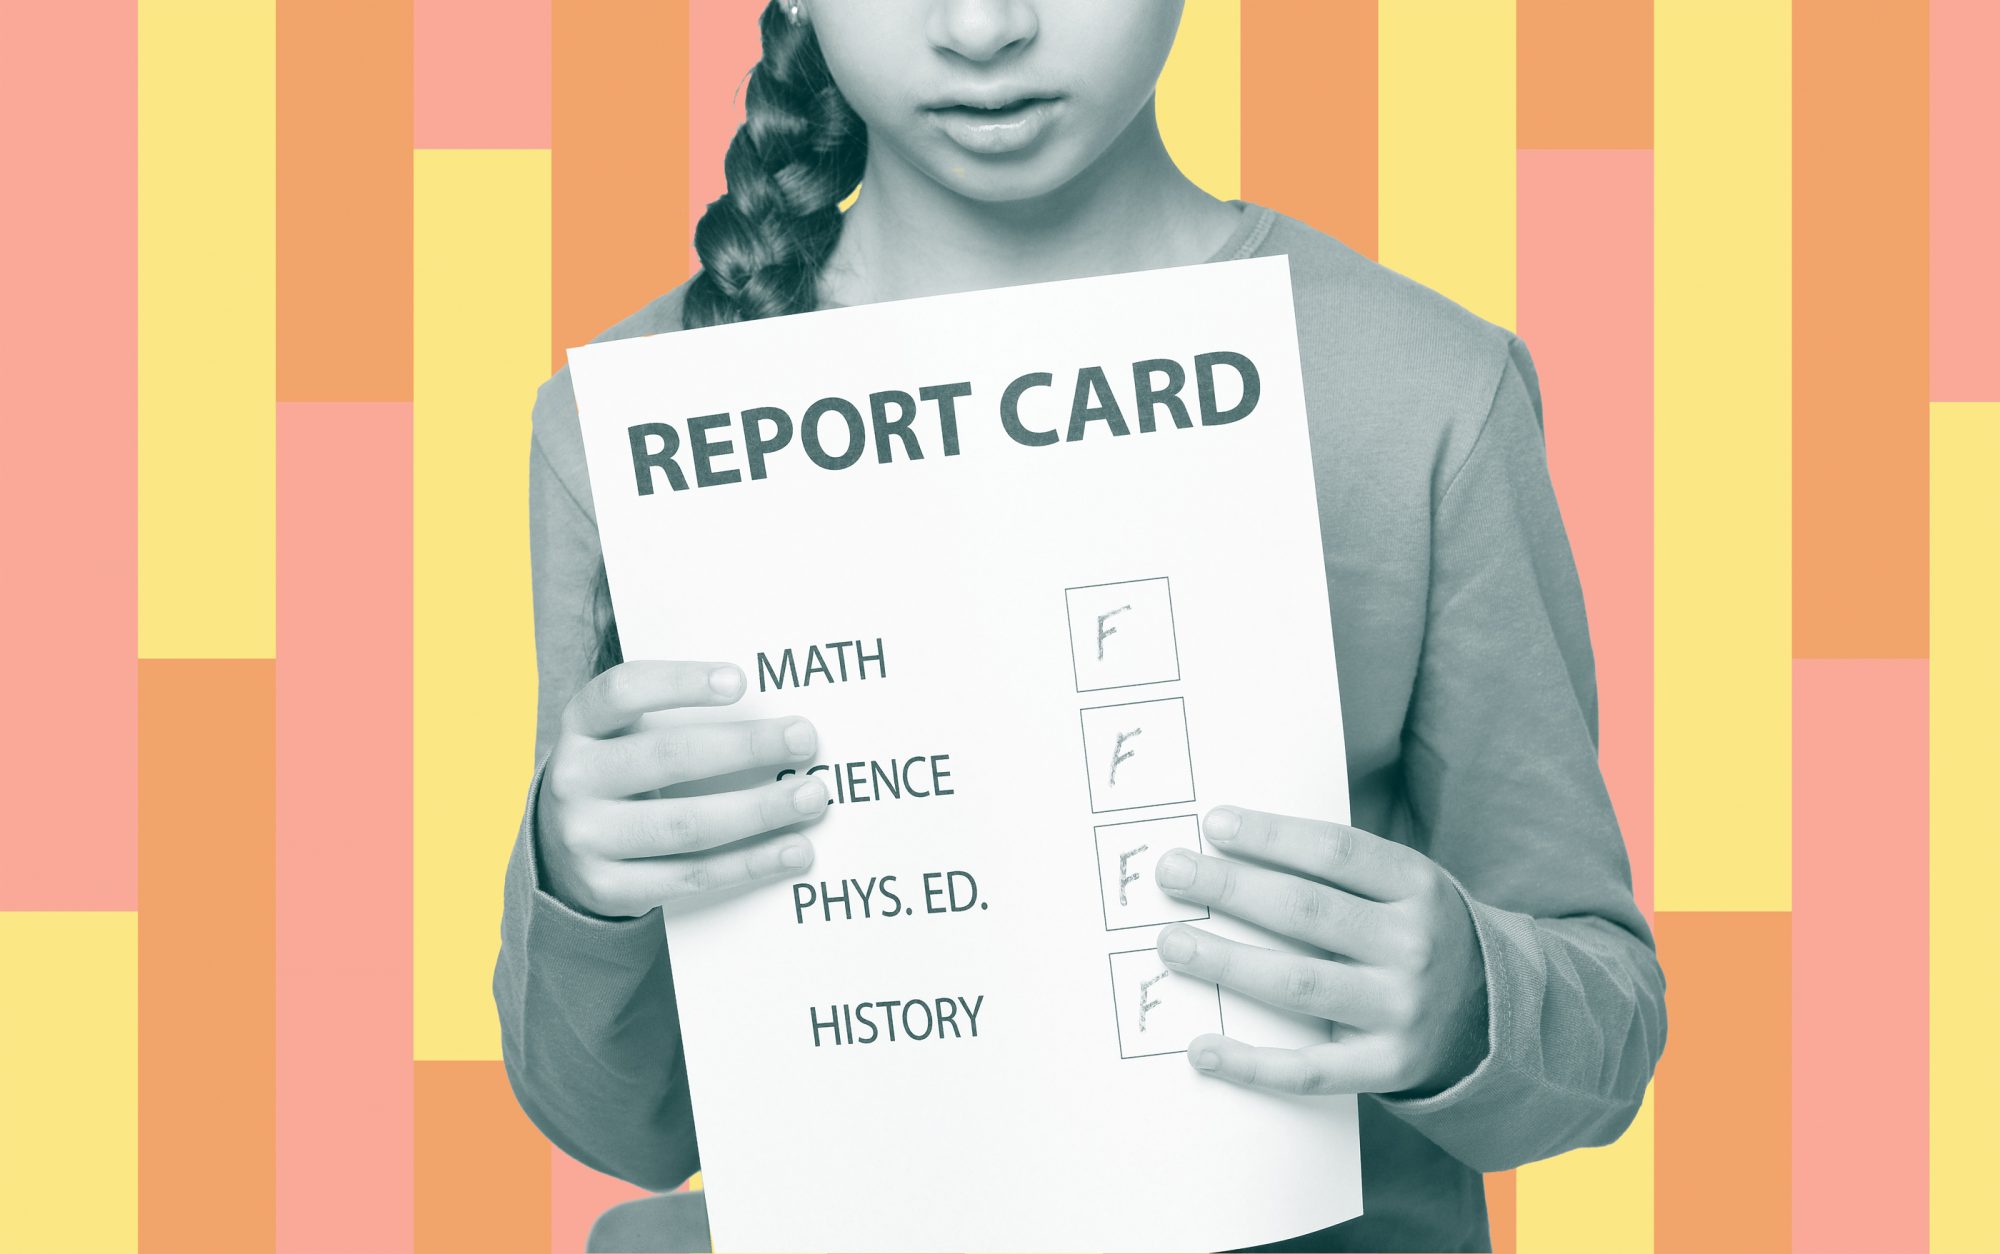 photo illustration of girl holding report card with F's